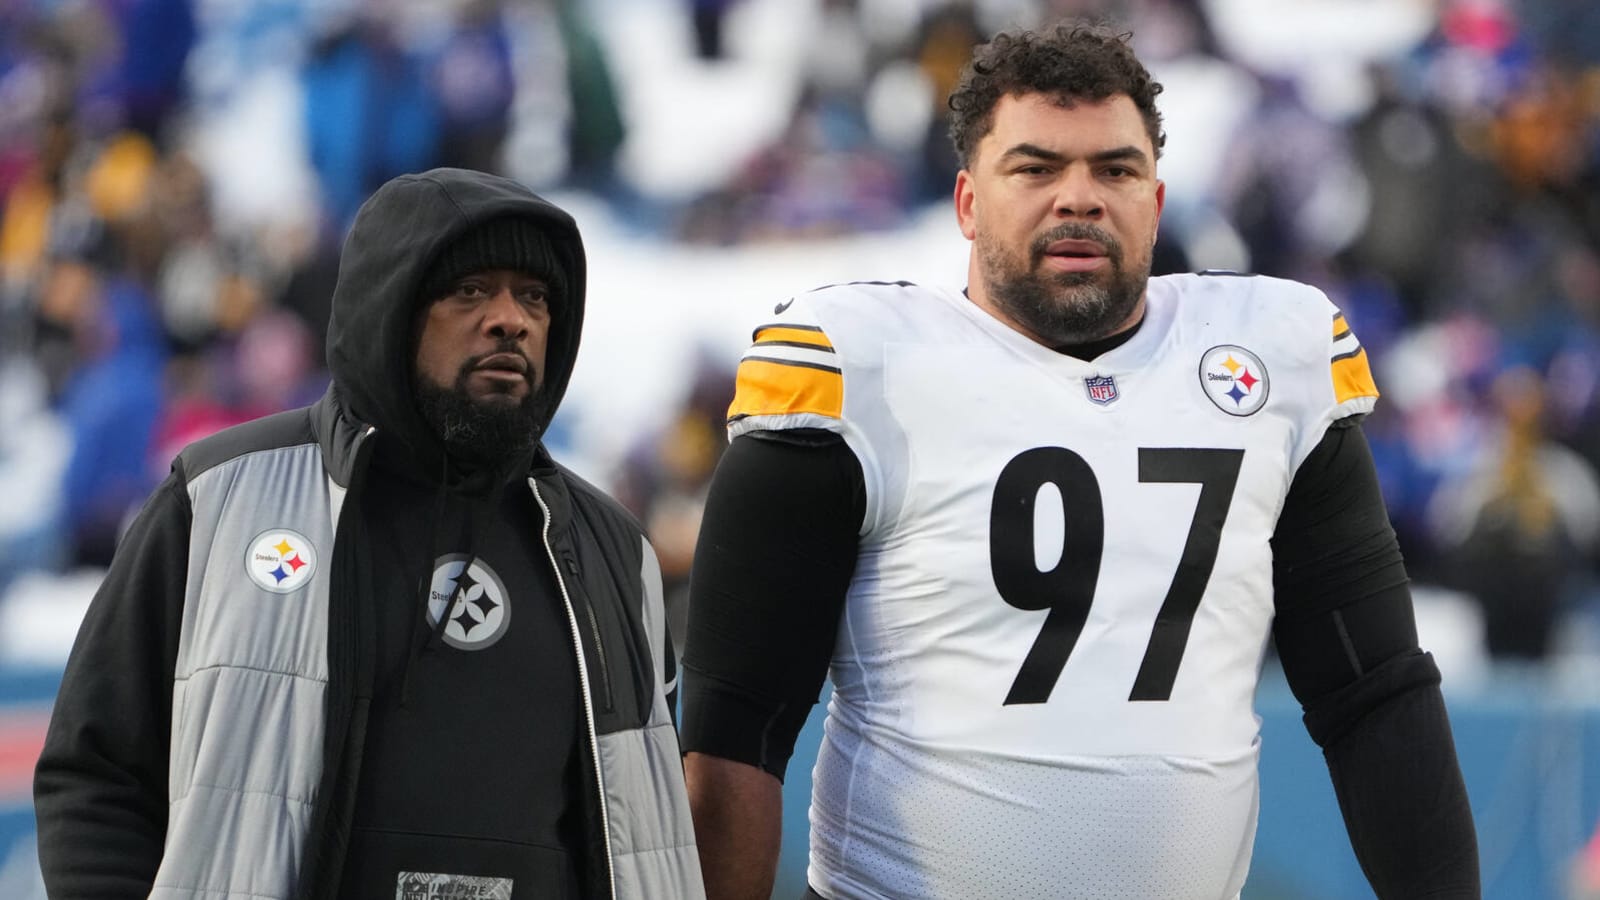 DT Cameron Heyward supports Steelers' controversial hire